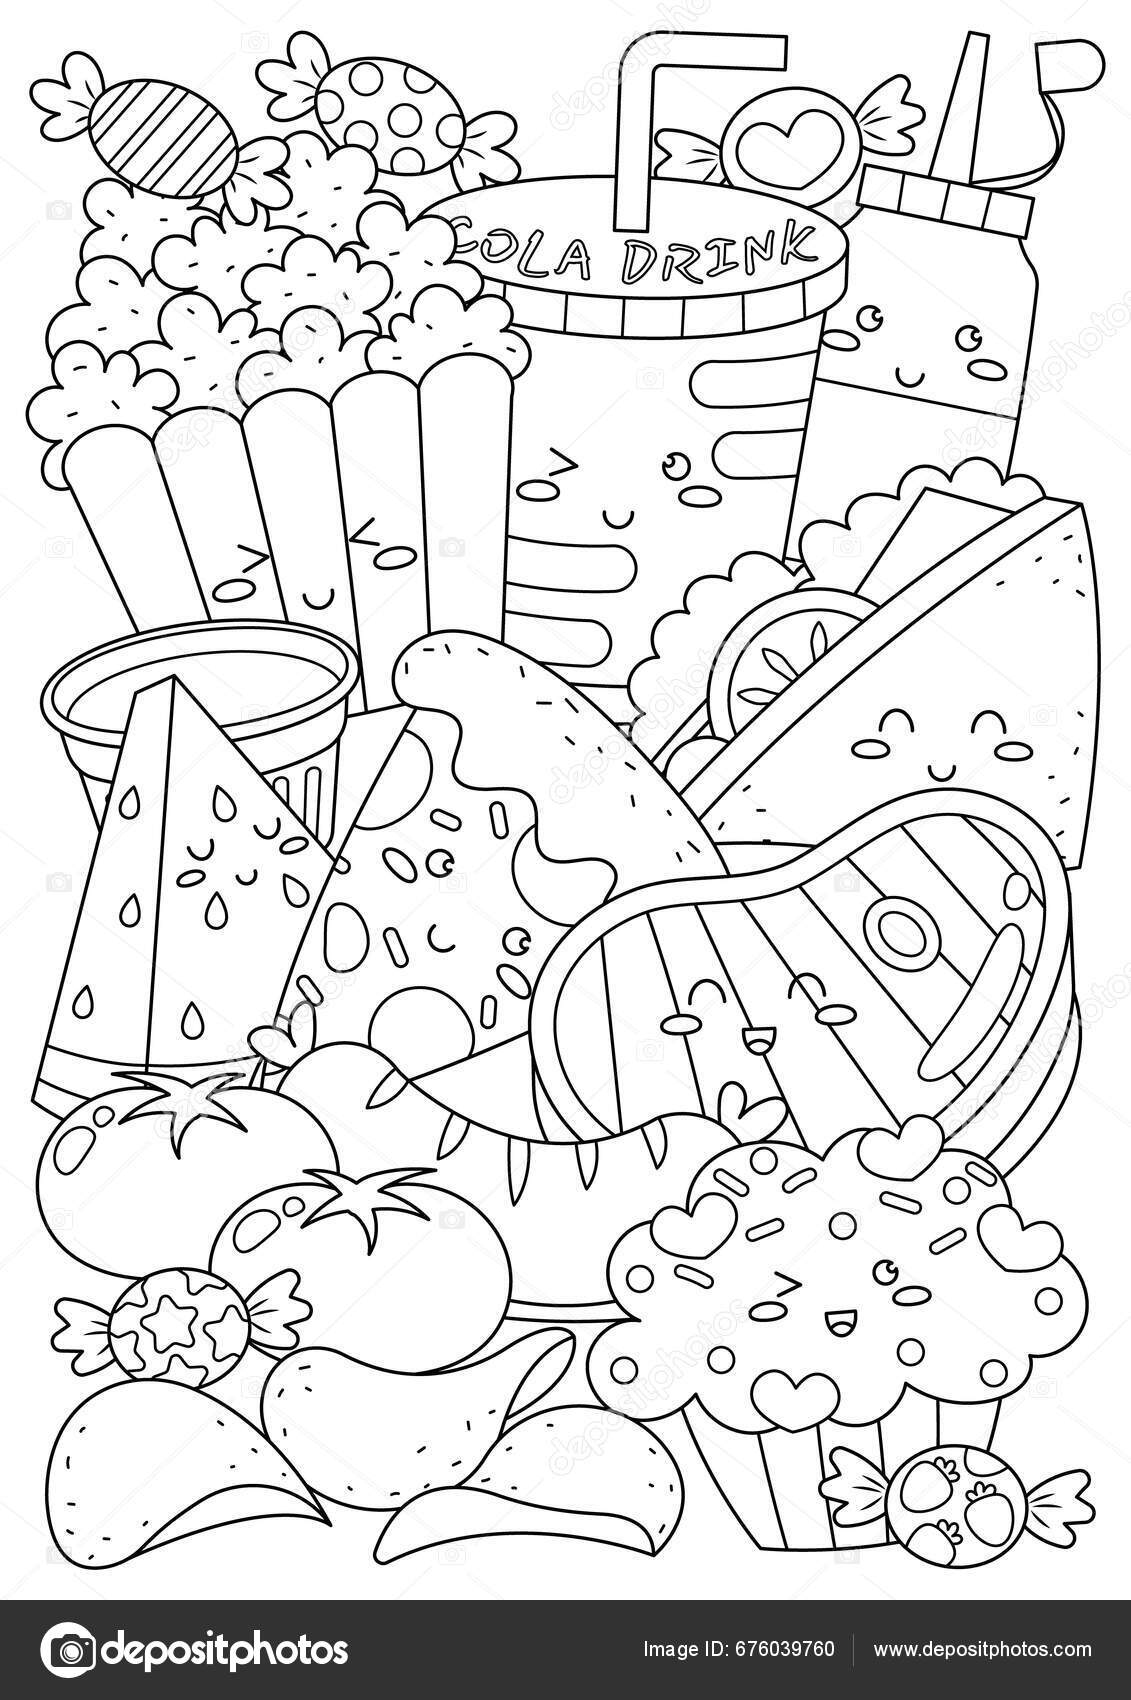 Coloring page adults teenagers coloring therapy meditation relaxation mindful stress stock vector by nutkinsj